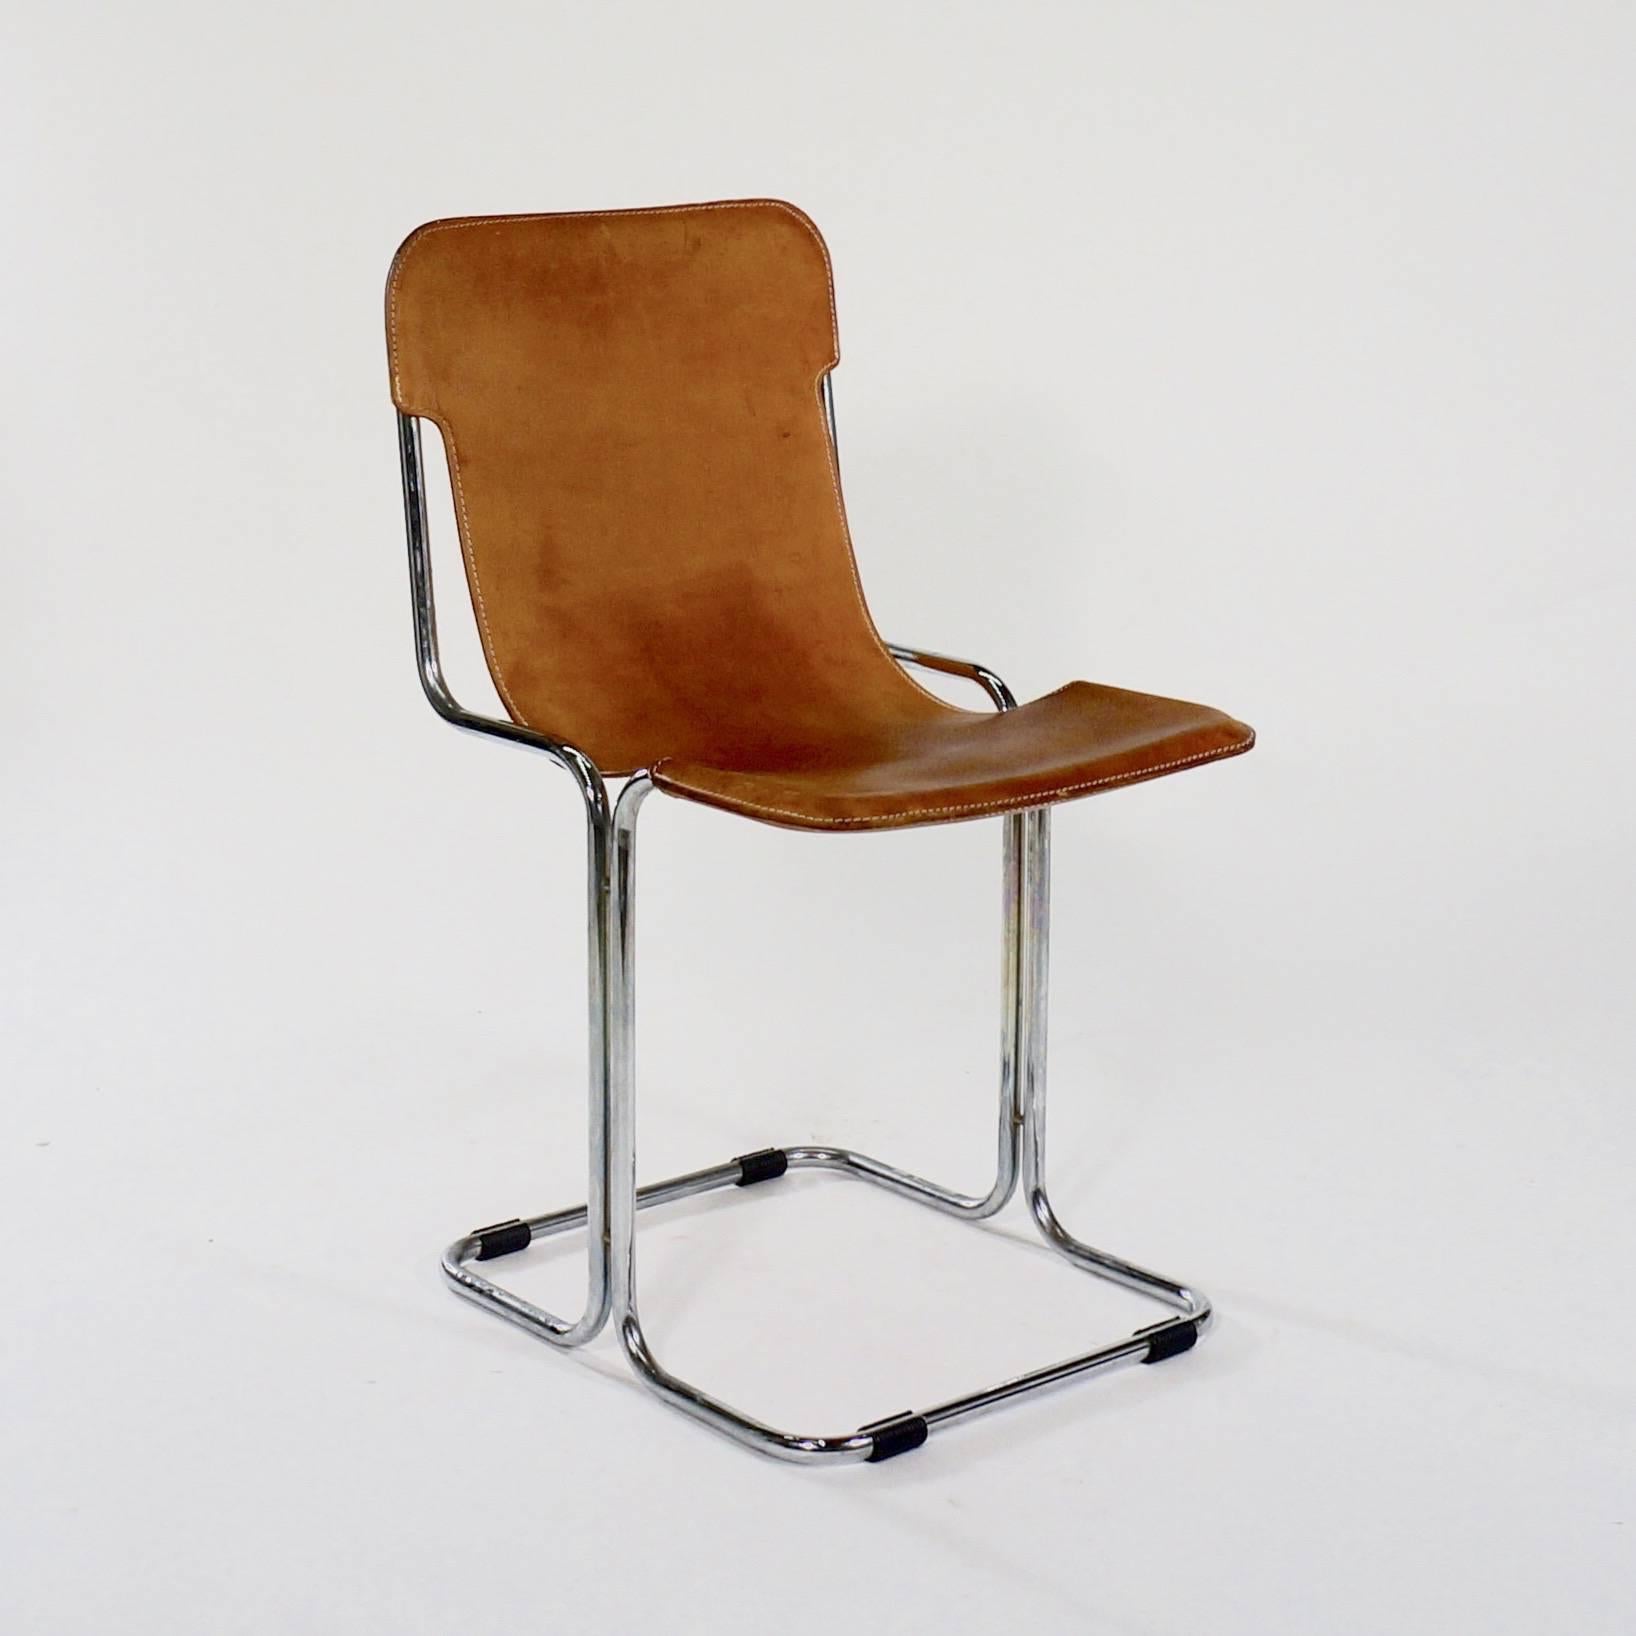 metal chair with leather seat